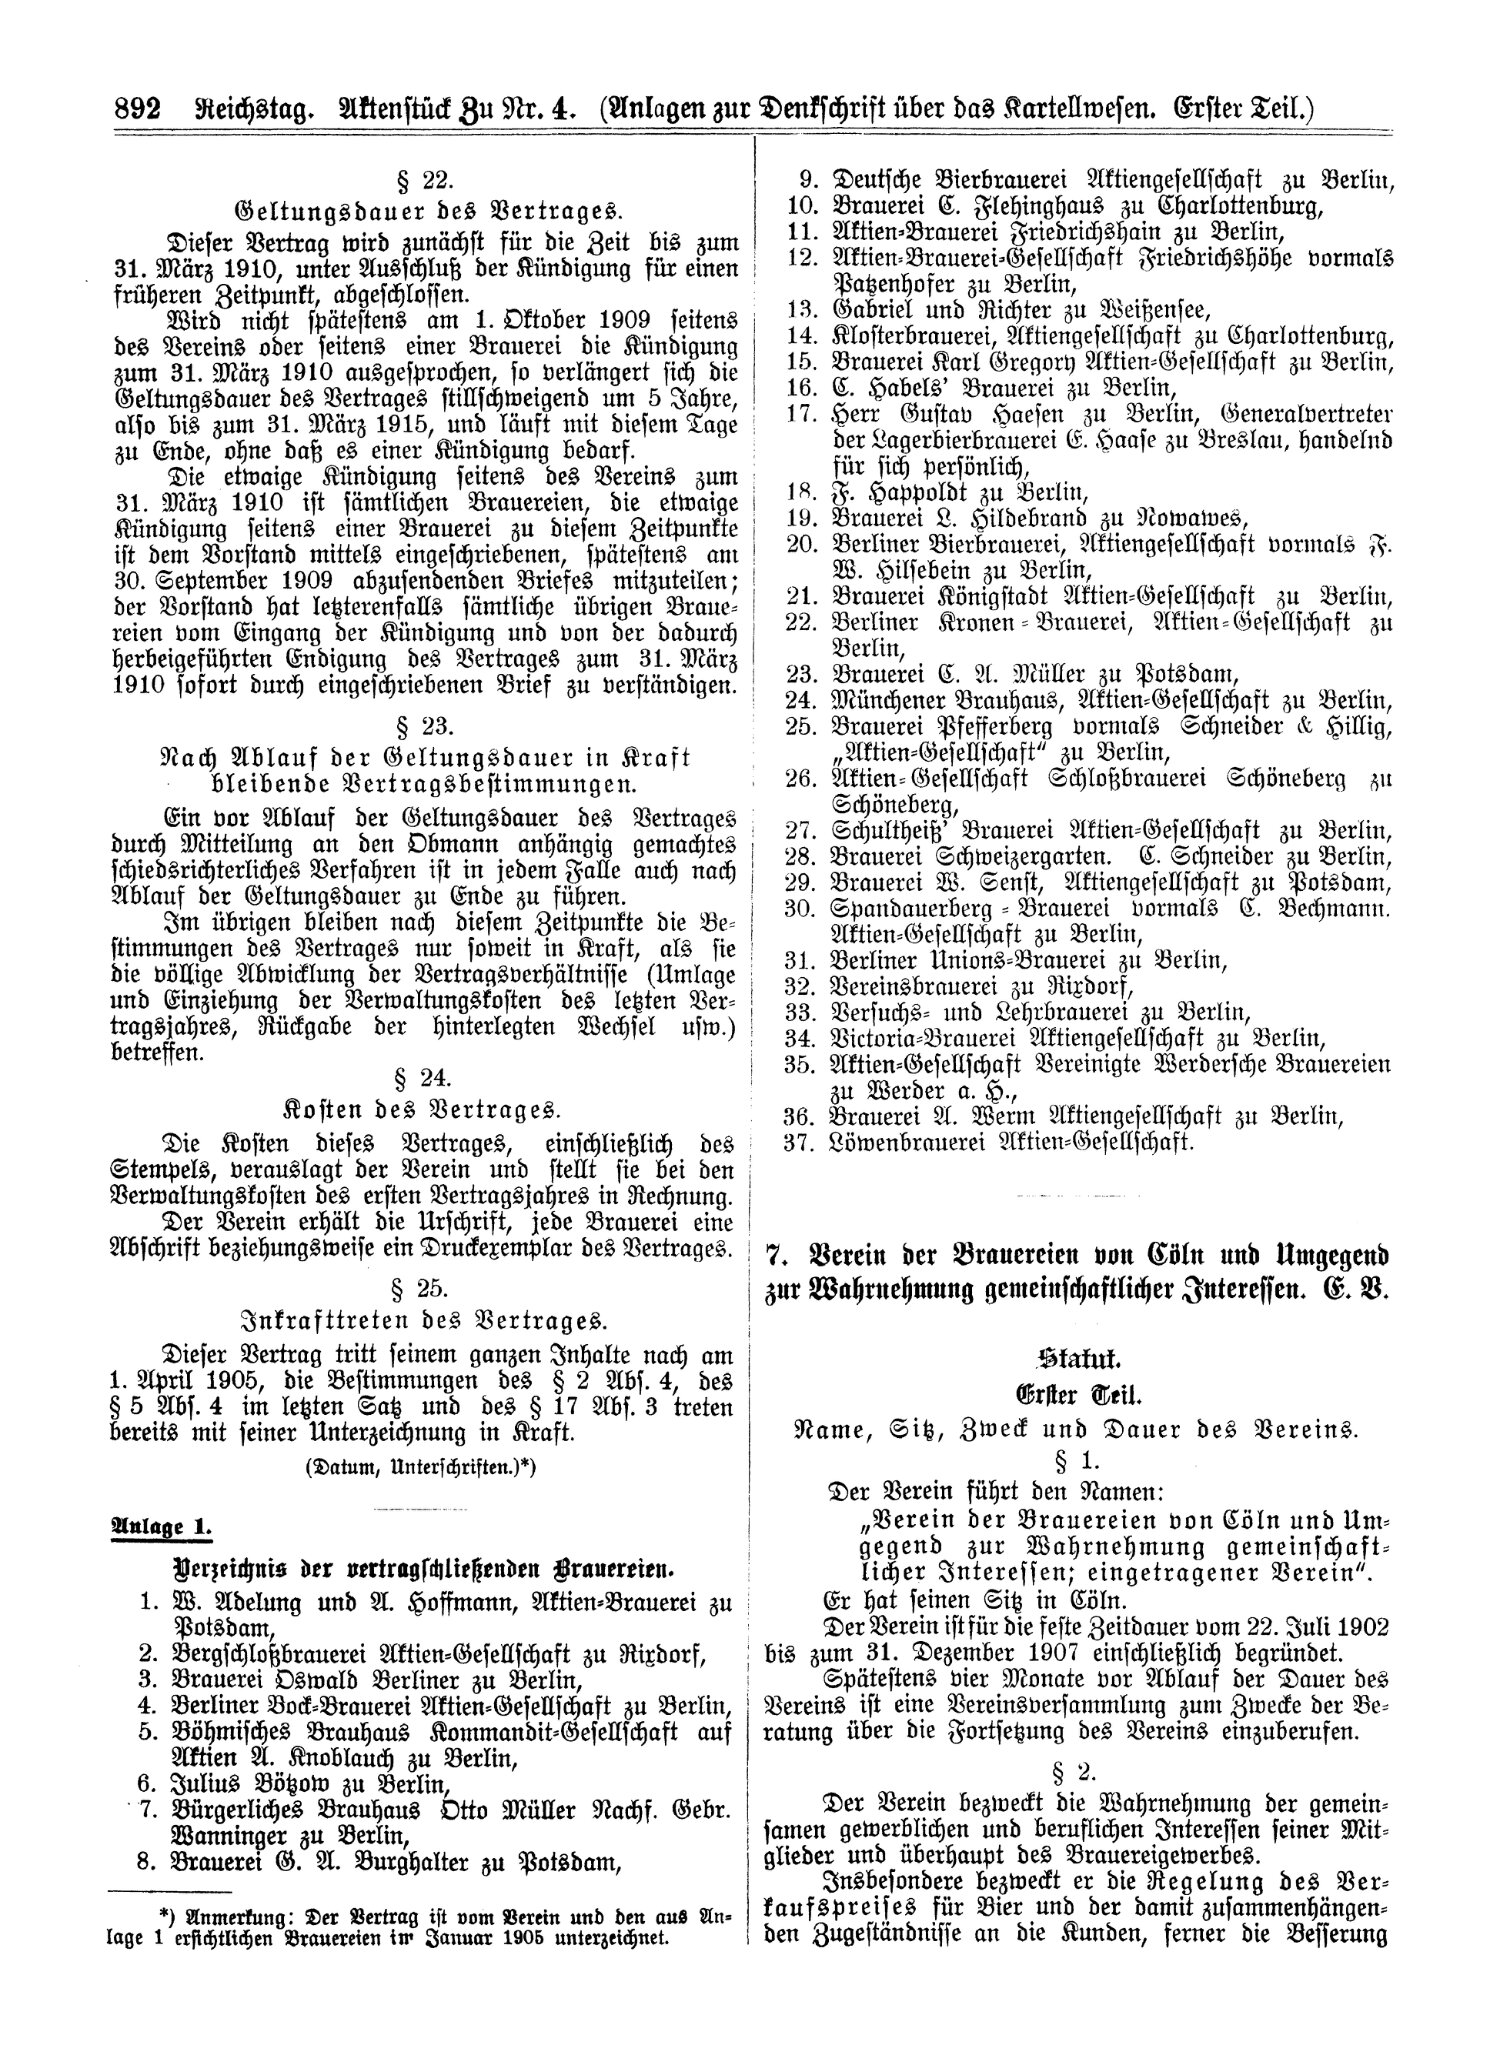 Scan of page 892